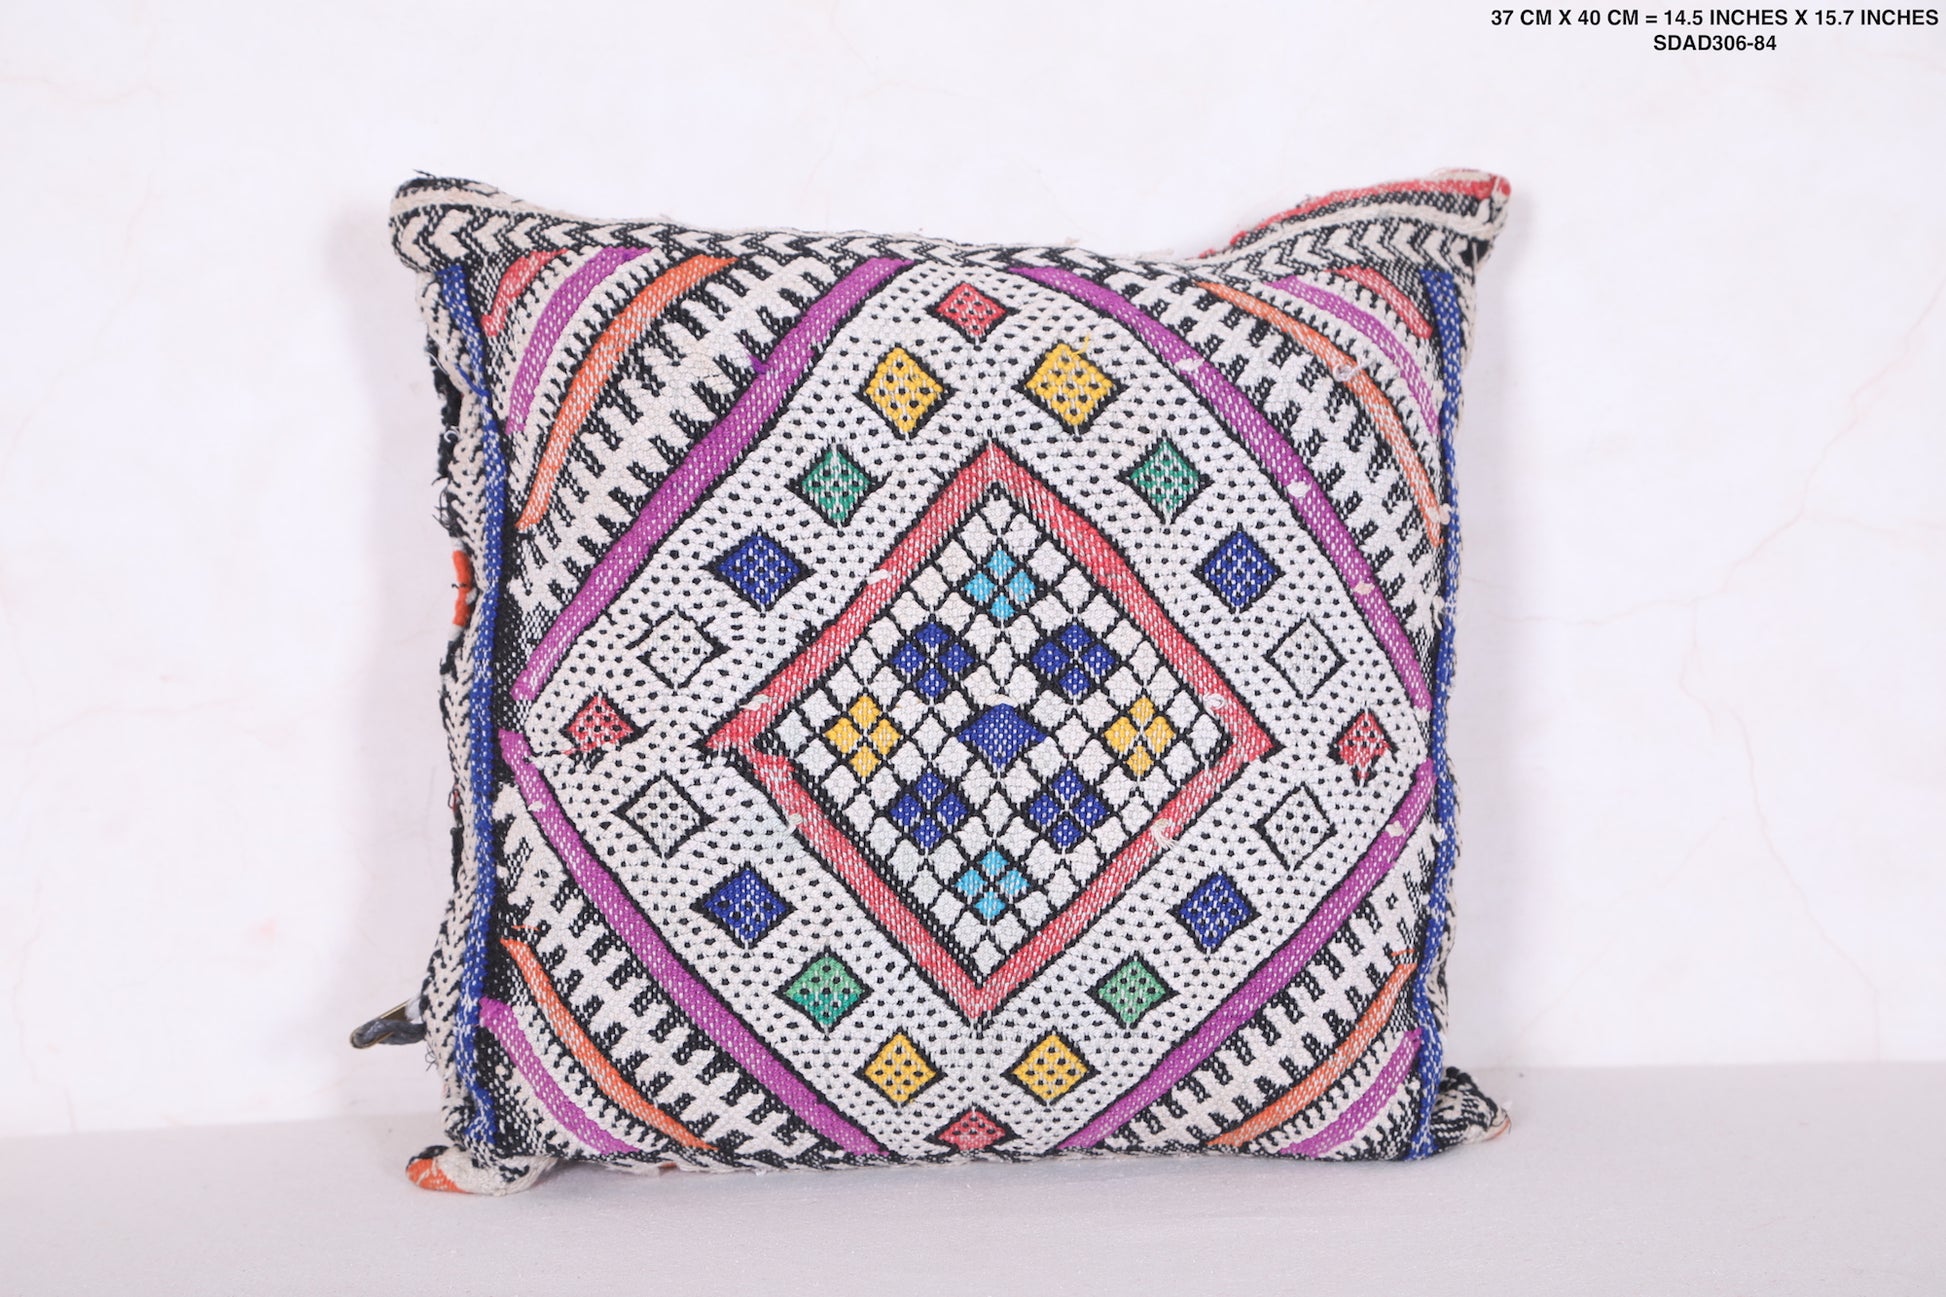 Vintage tribal pillow 14.5 INCHES X 15.7 INCHES